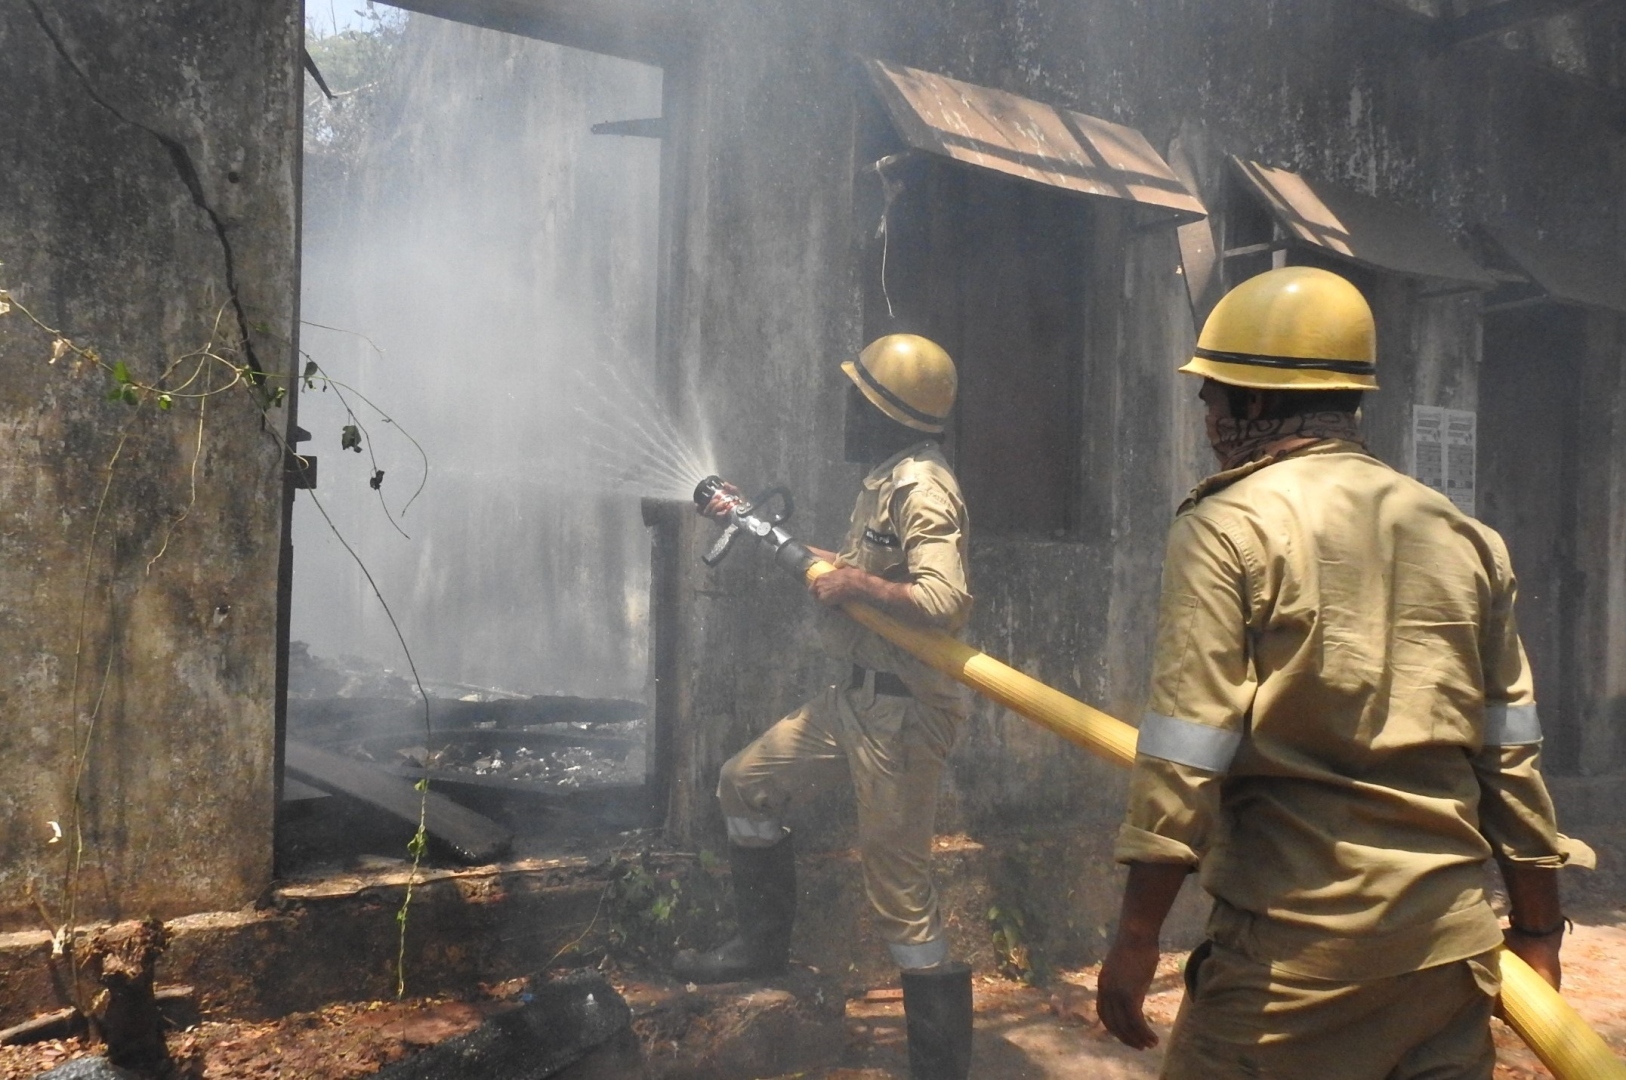 Old closed house gutted in fire near Ravindra Bhavan